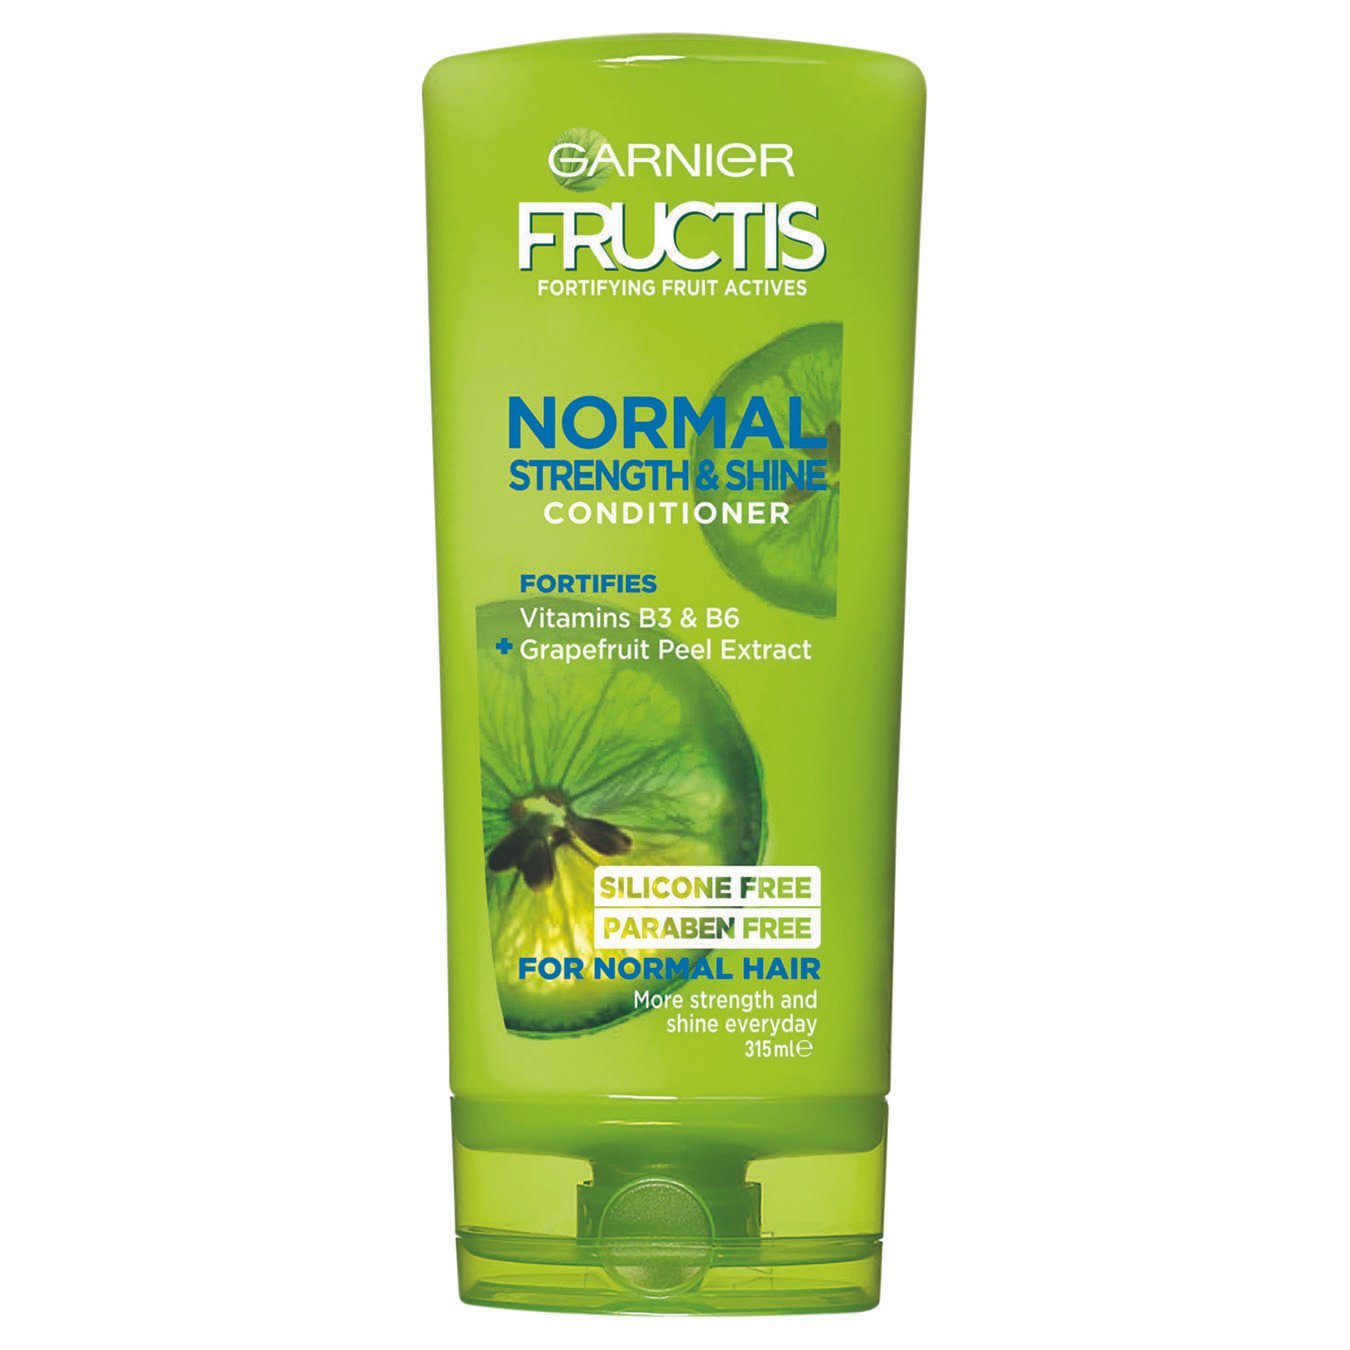 Fructis Normal Strength & Shine Conditioner